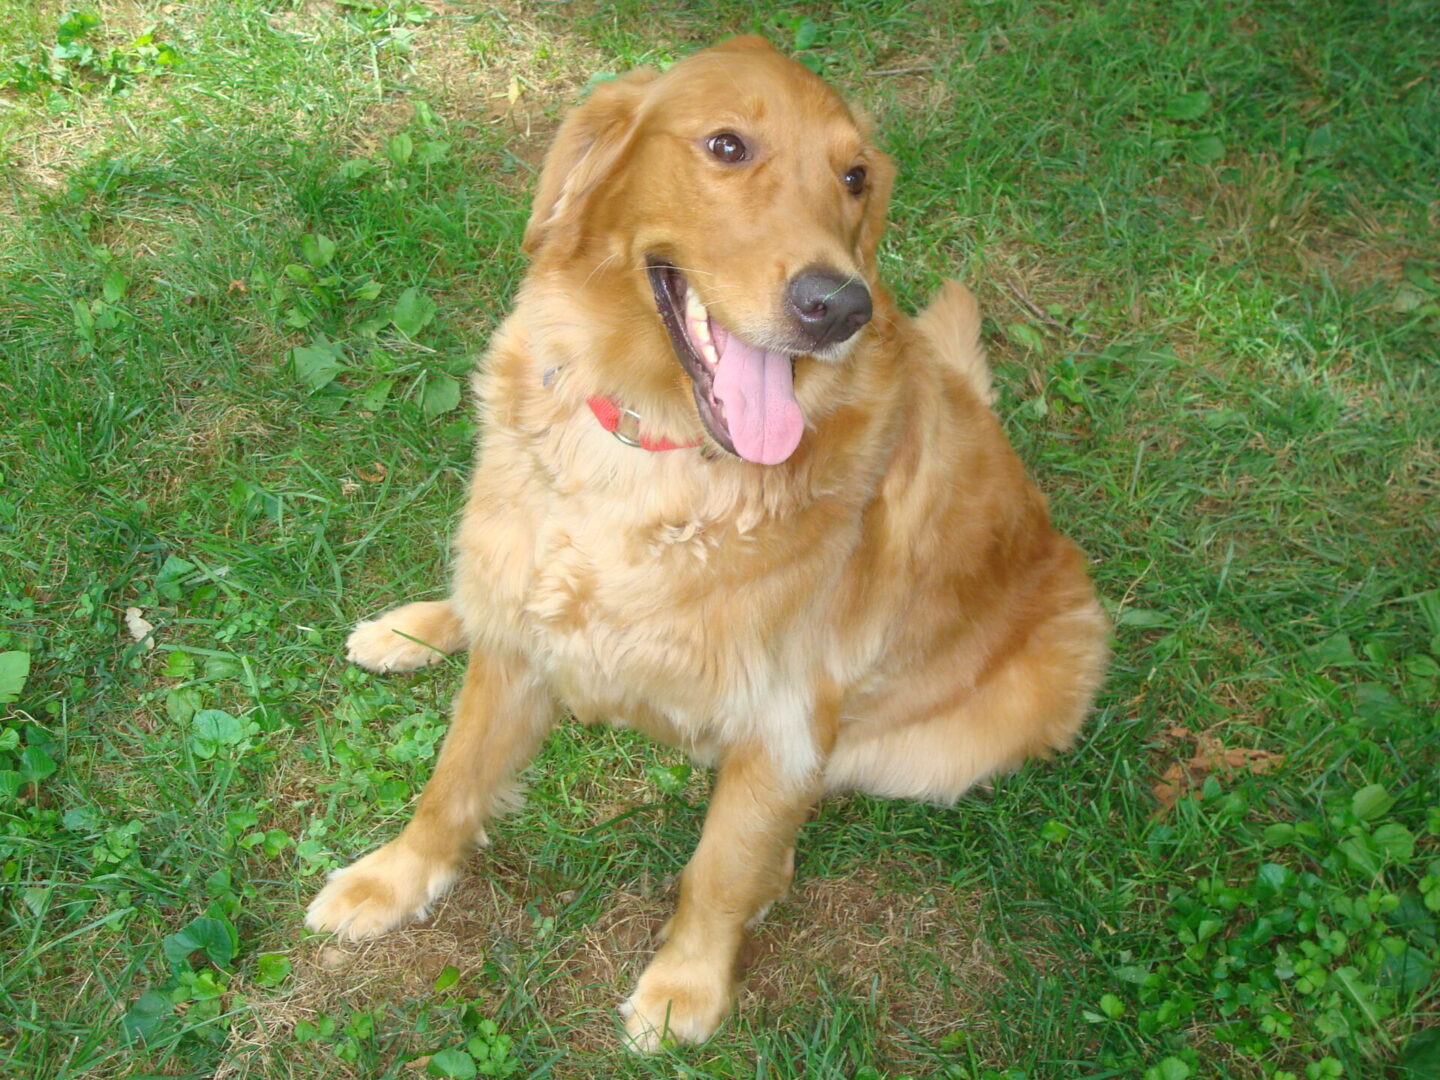 Golden retriever sitting on grass with its tongue out.